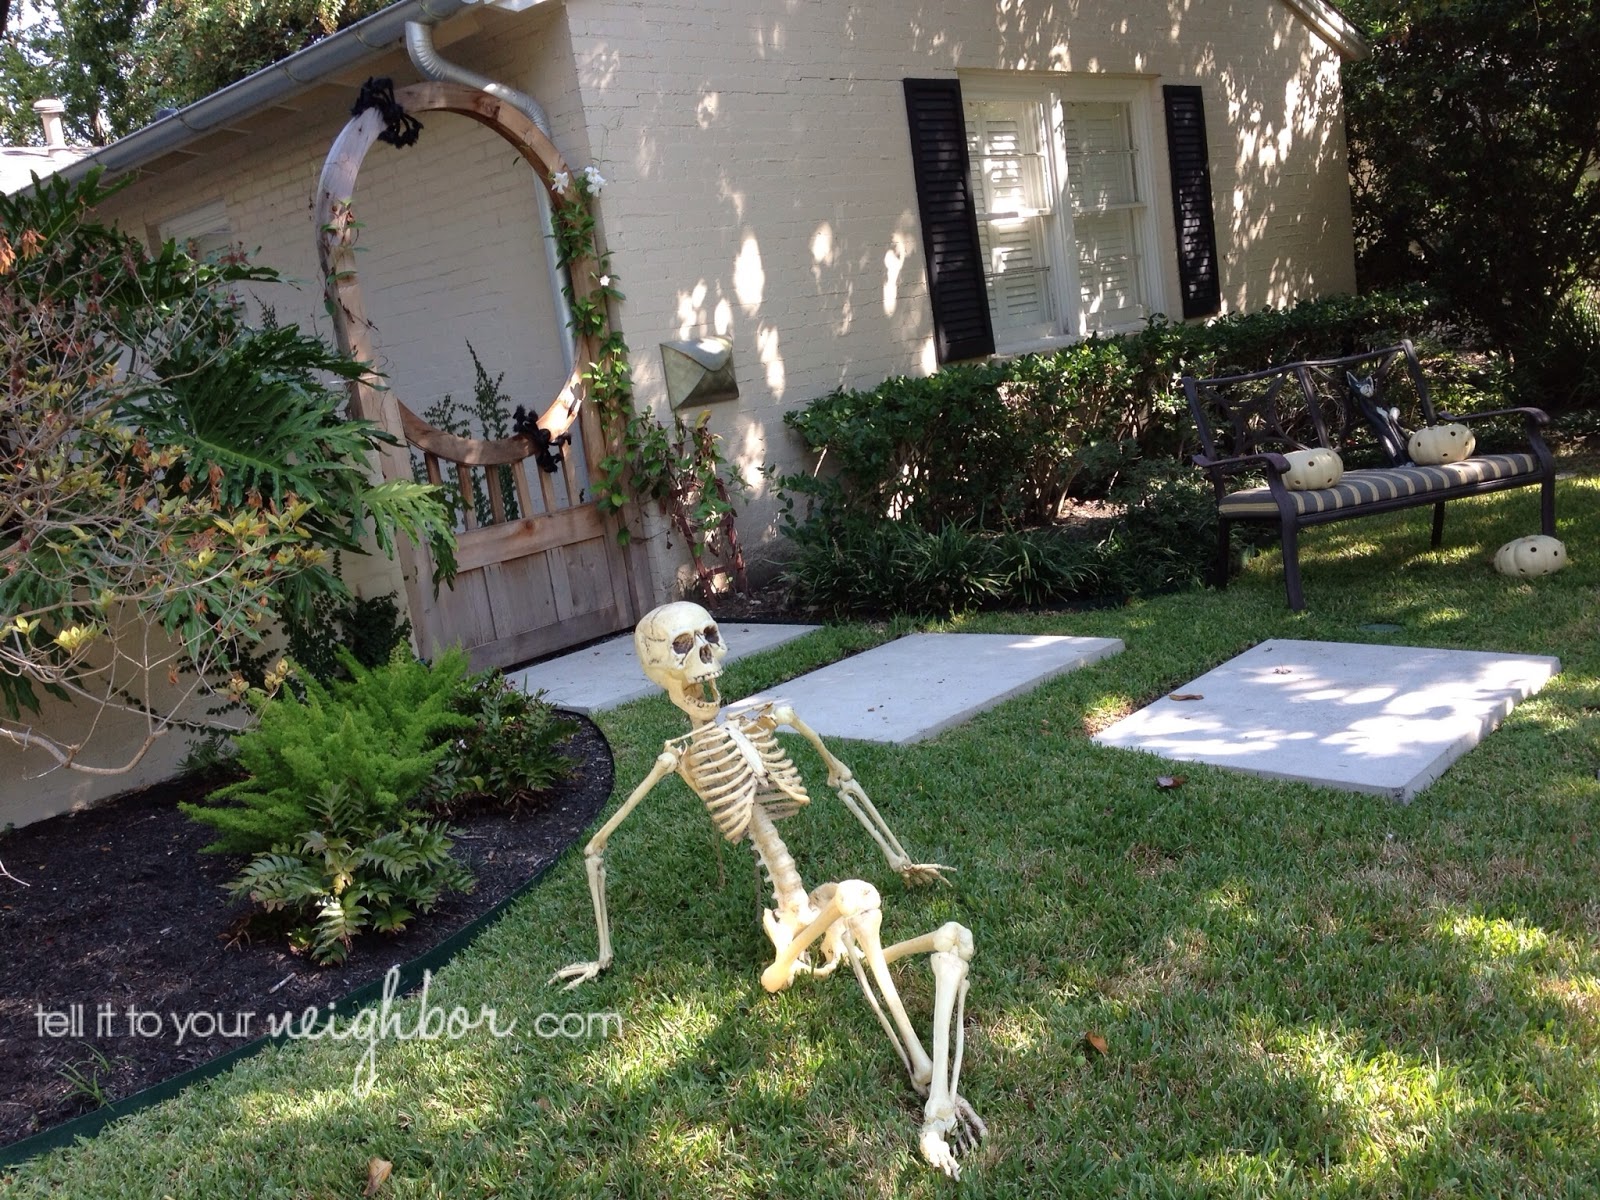 tell it to your neighbor!: Elf on the Shelf or Skeleton in the Yard?